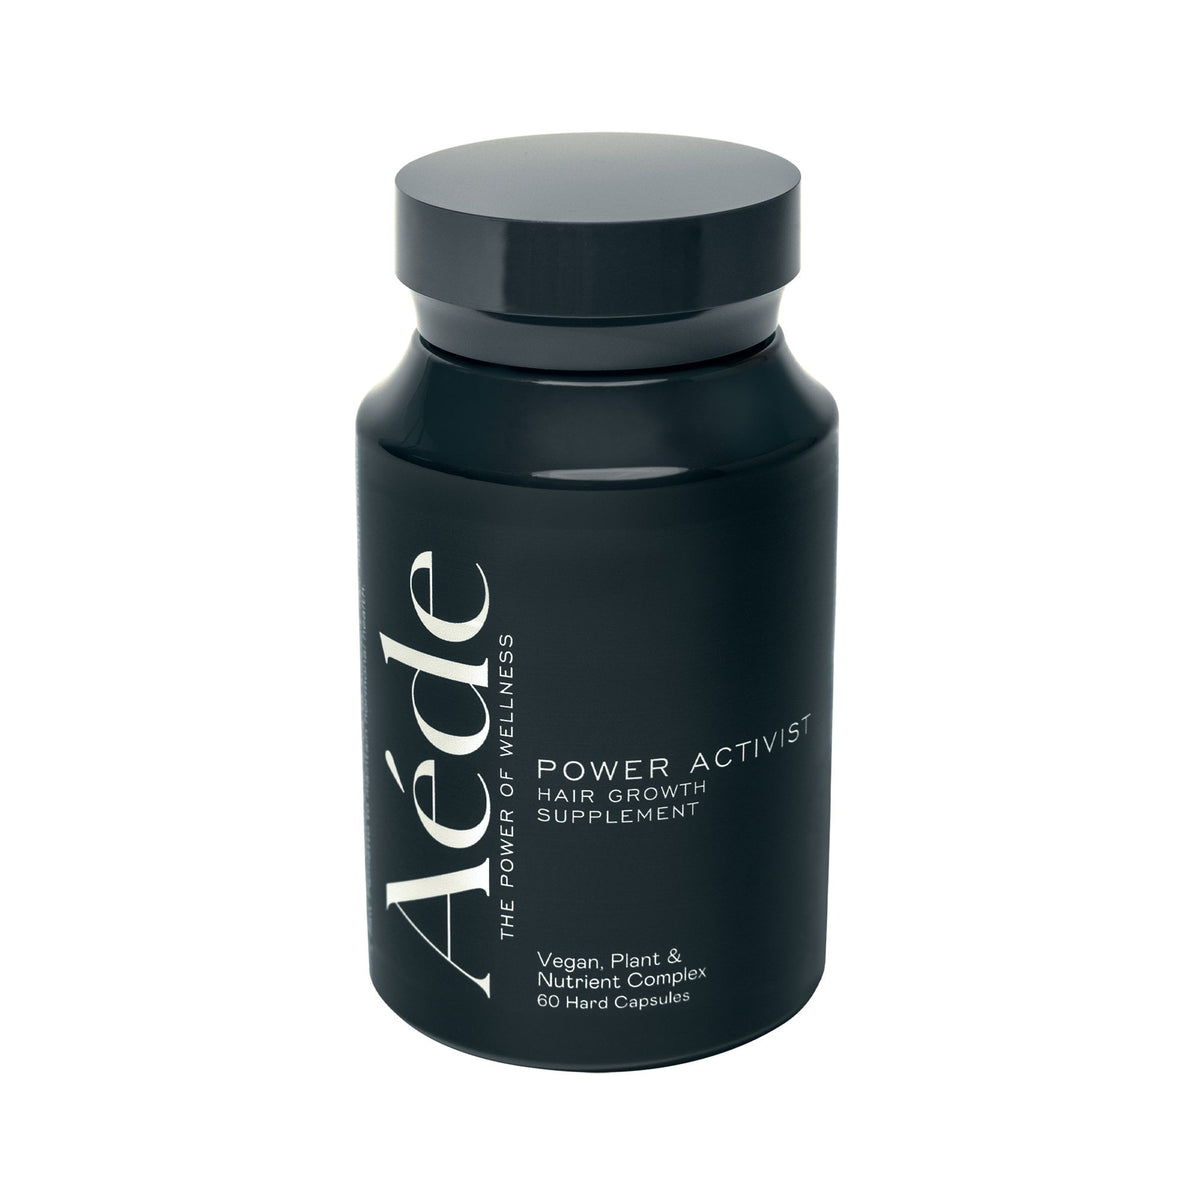 power activist. supplement to help hair growth. vegan, plant and nutrient, complex. 60 hard capsules